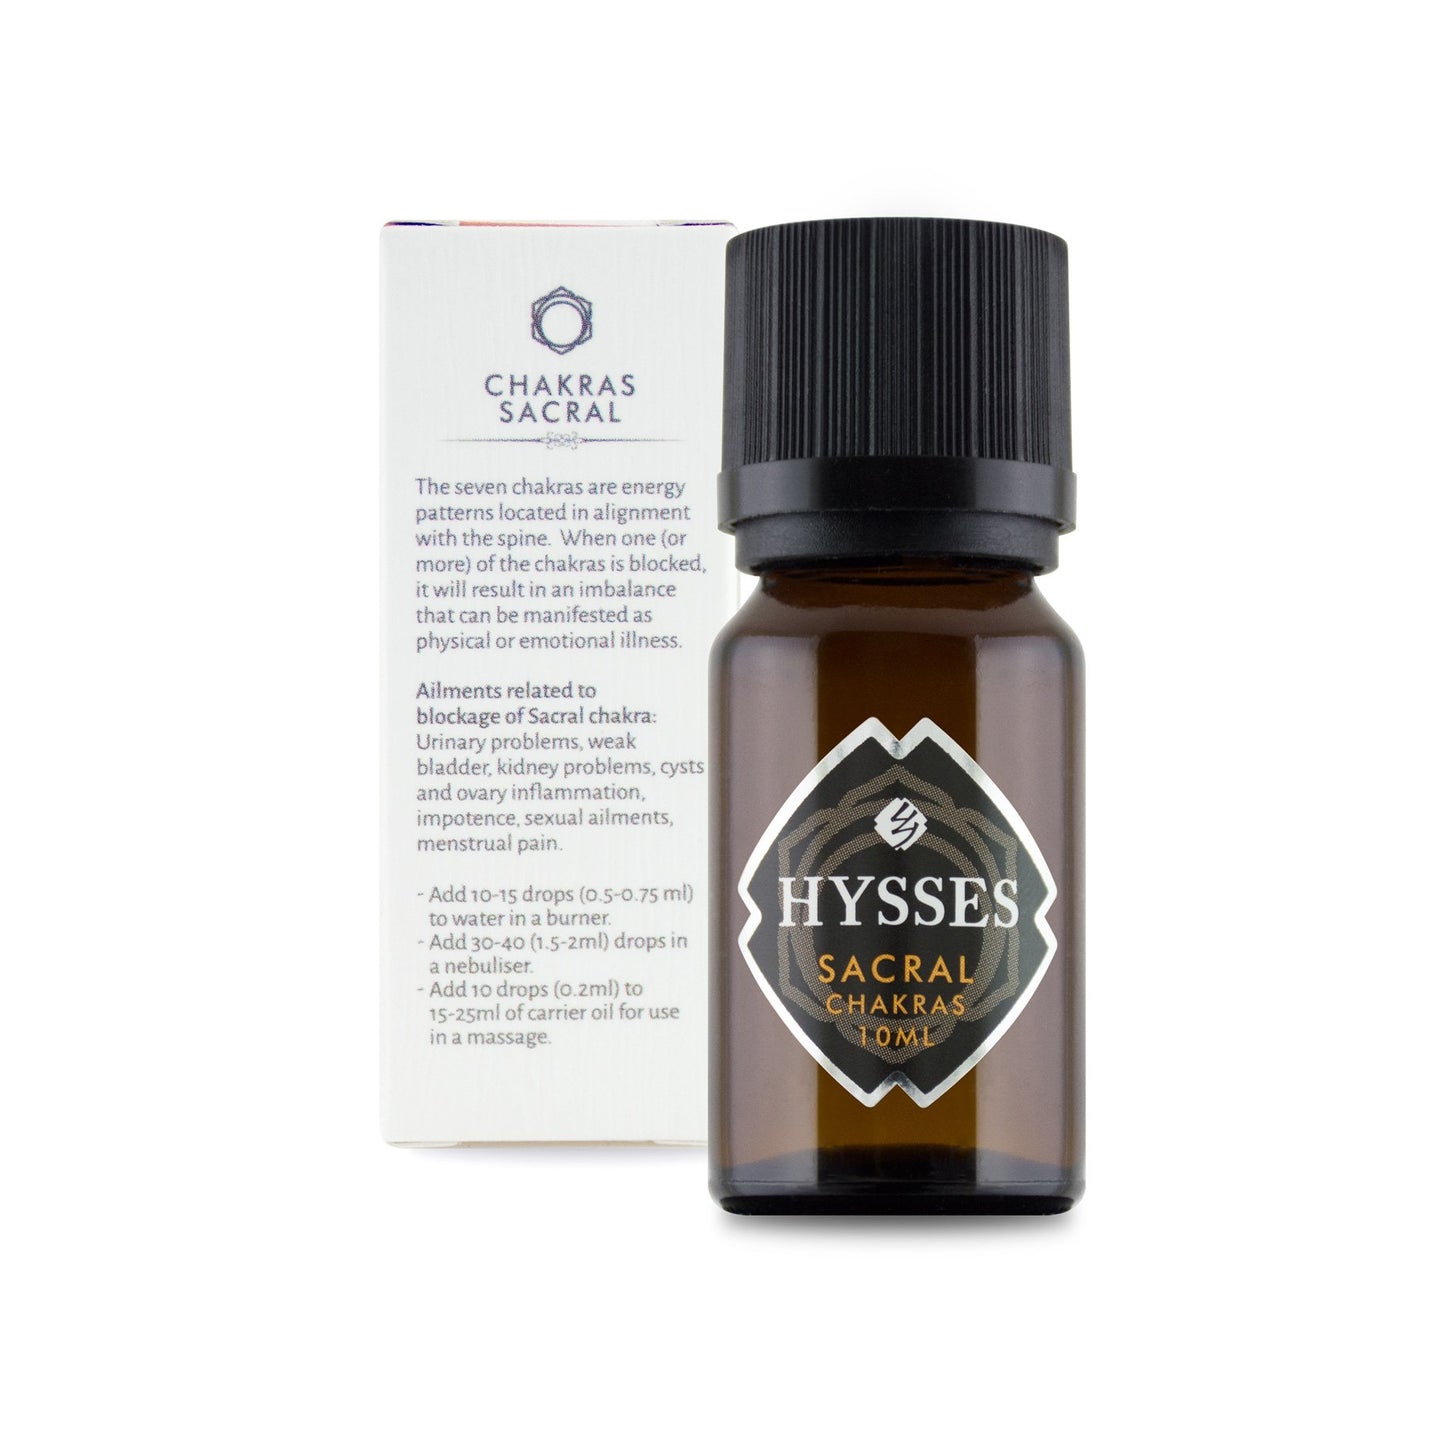 Hysses Essential Oils, Chakras Collection 10ml - Sacral